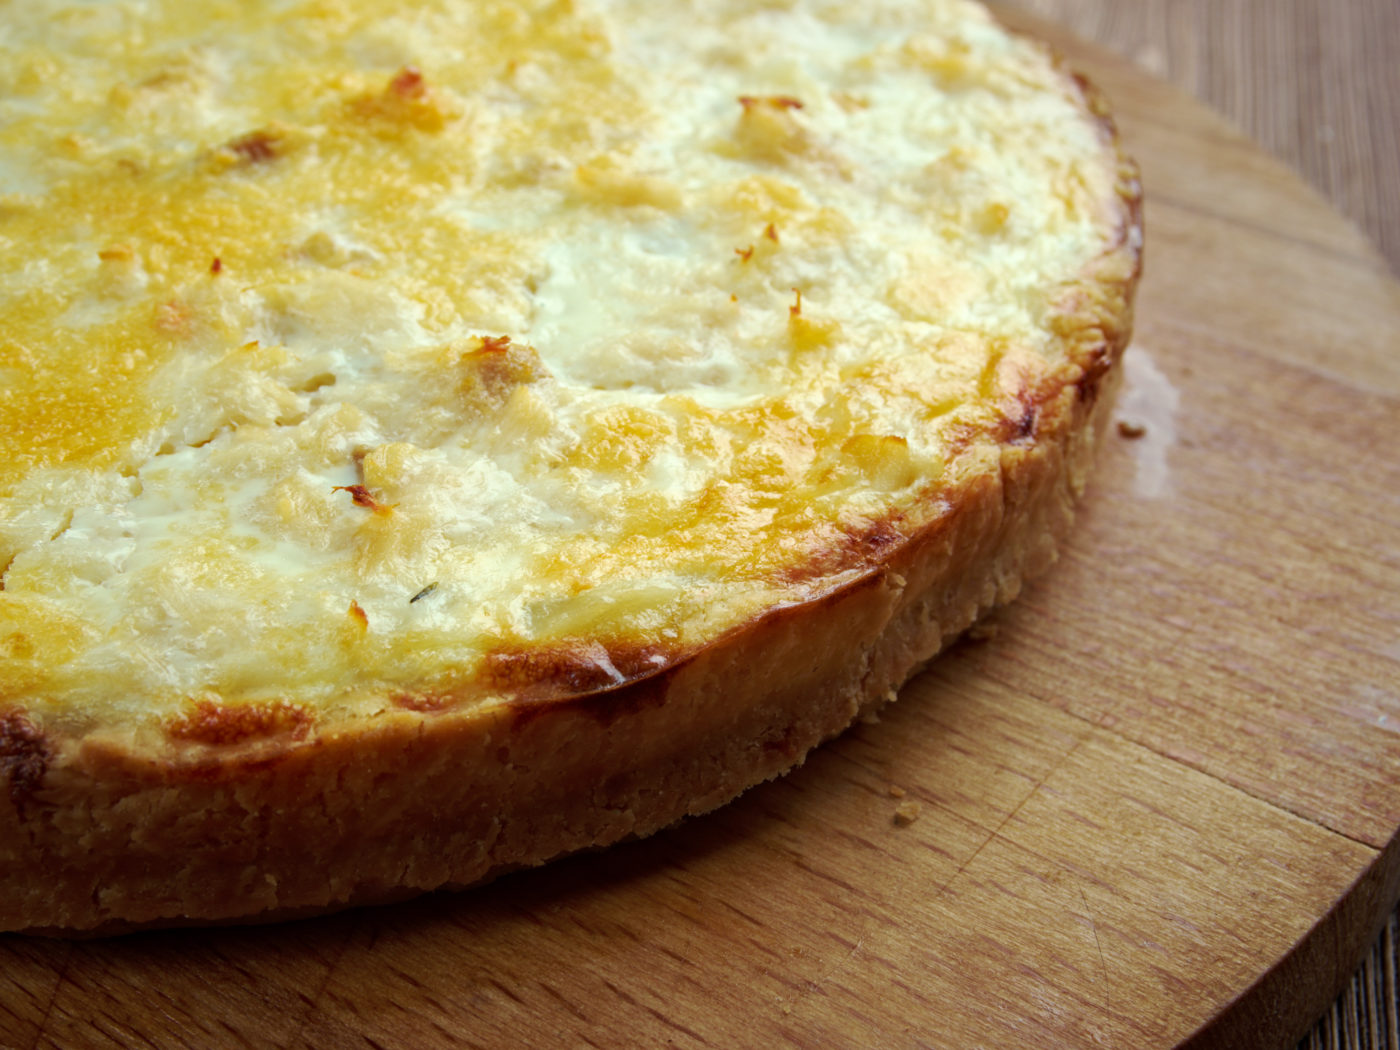 tasty homemade quiche with cod.farm-style